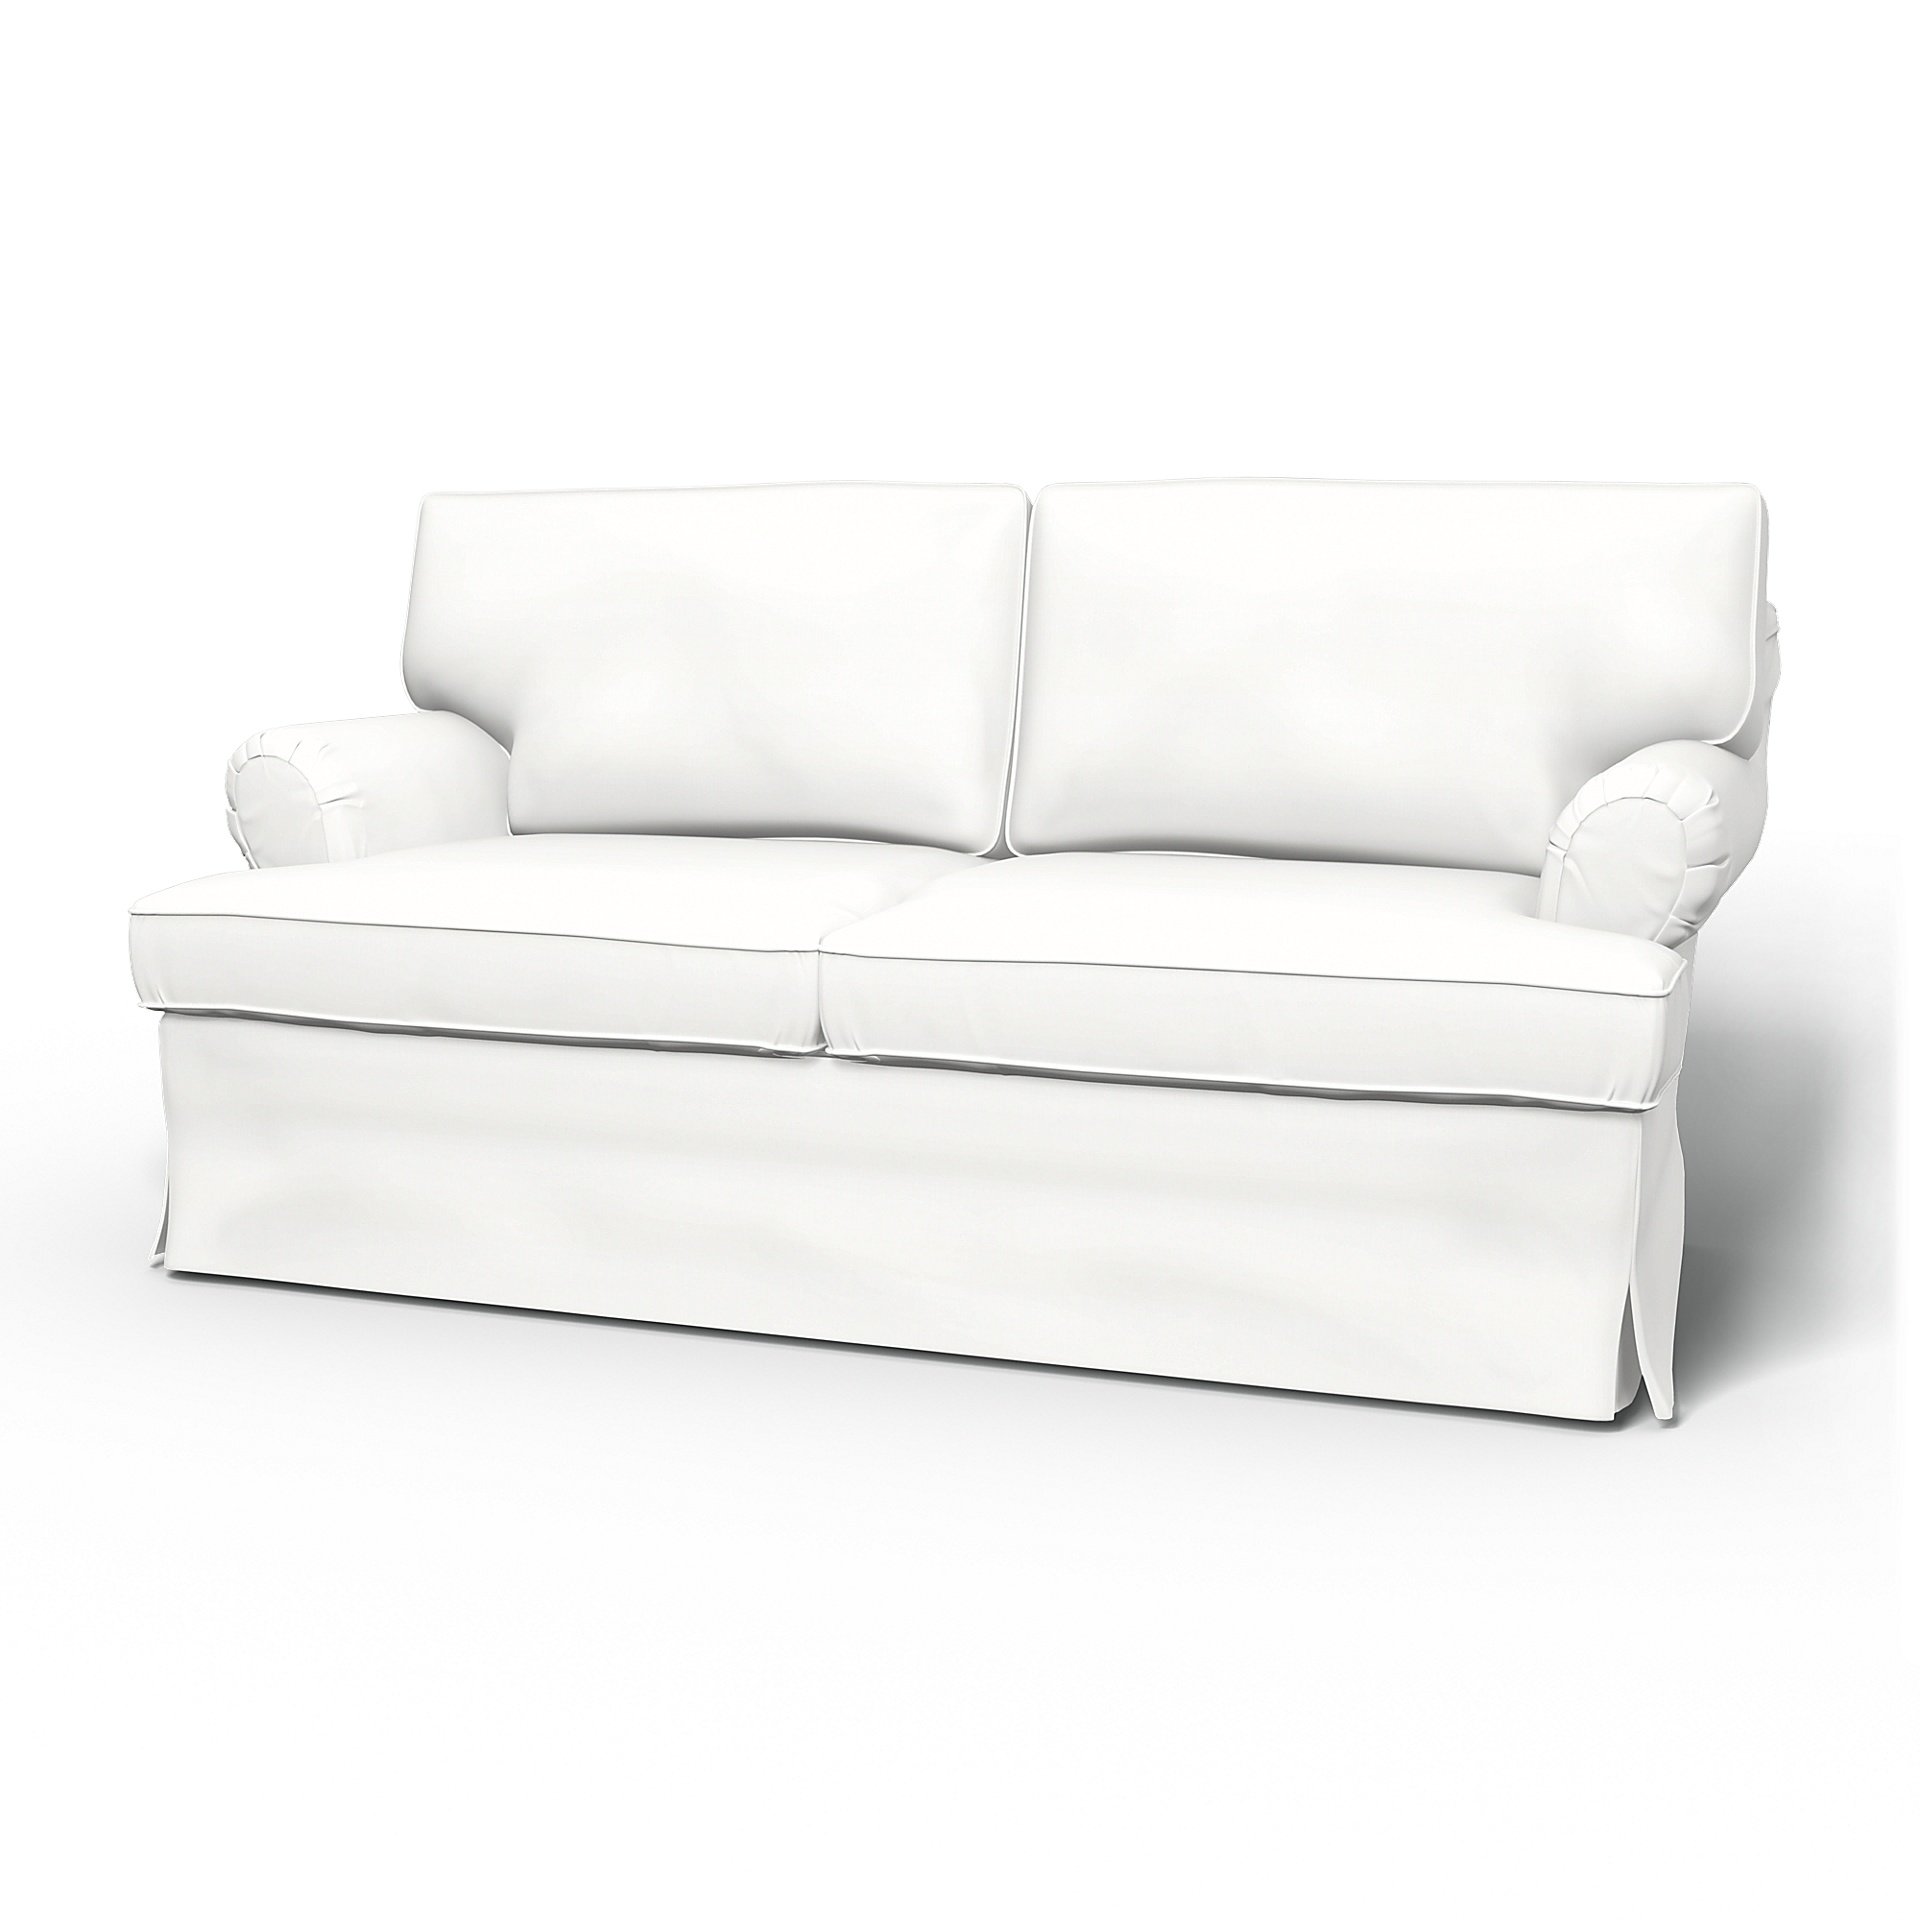 IKEA - Stockholm 2 Seater Sofa Cover (1994-2000), Absolute White, Linen - Bemz